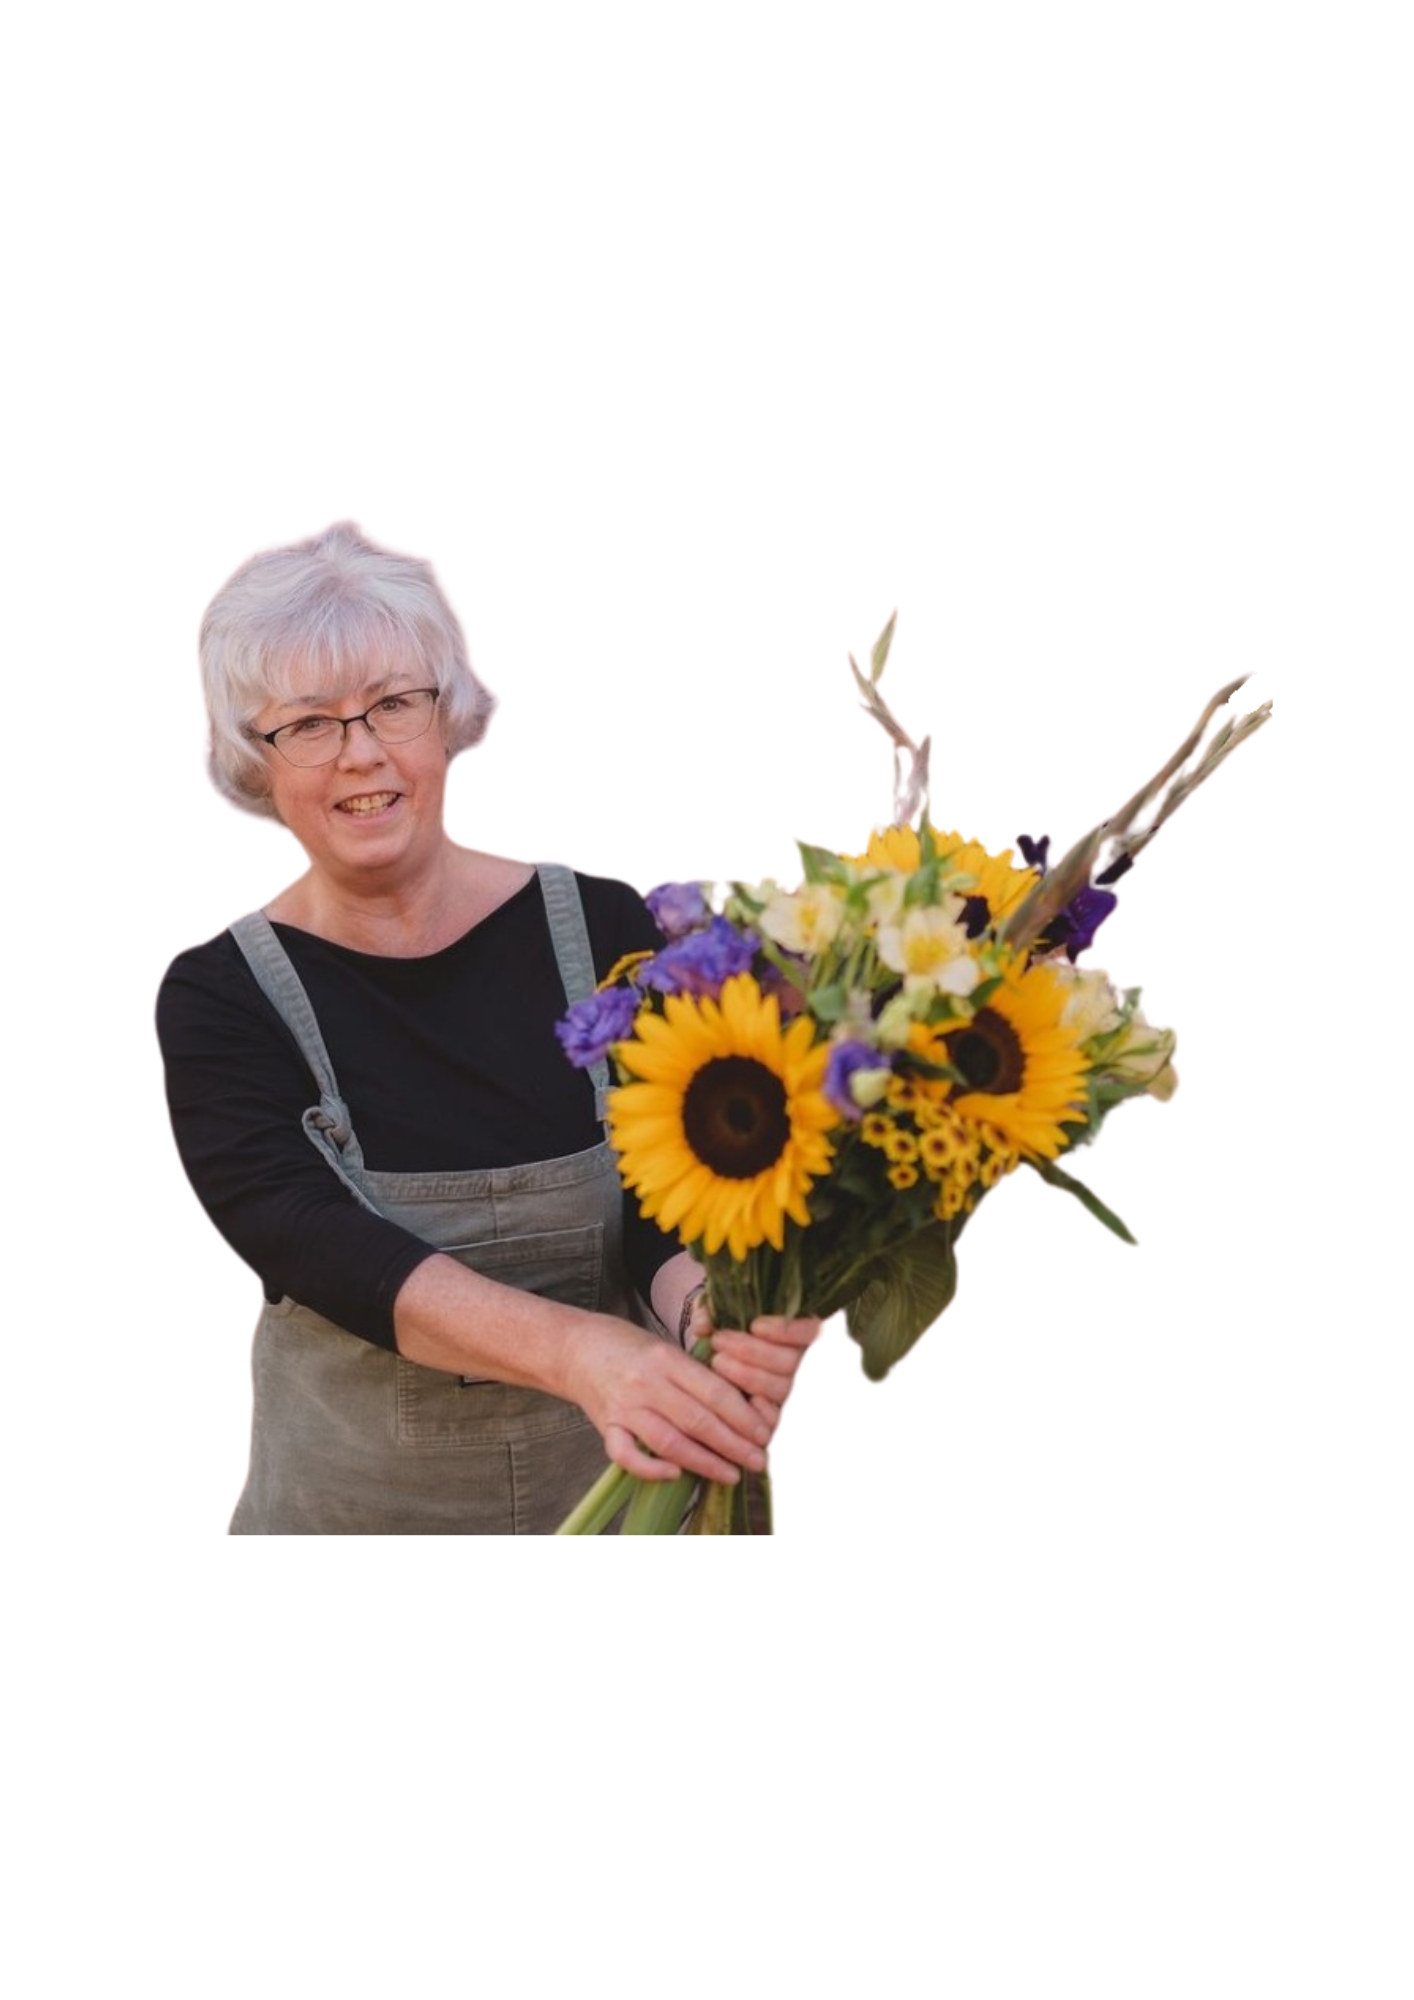 <h2>Florist Flowers Liverpool | Florist Delivery Liverpool</h2>
<p>To make ordering easy, and to help us process your order quickly, we have created a Florist Choice bouquet option.  This product will contain a mix of beautiful seasonal garden flowers.</p>
<p>Choose a price that suits you, and allow our expert florists to create a special bouquet using the lushest and freshest flowers.</p>
<p>Your flowers will be lovingly arranged and gift wrapped in our signature eco-friendly packaging.</p>
<p> </p>